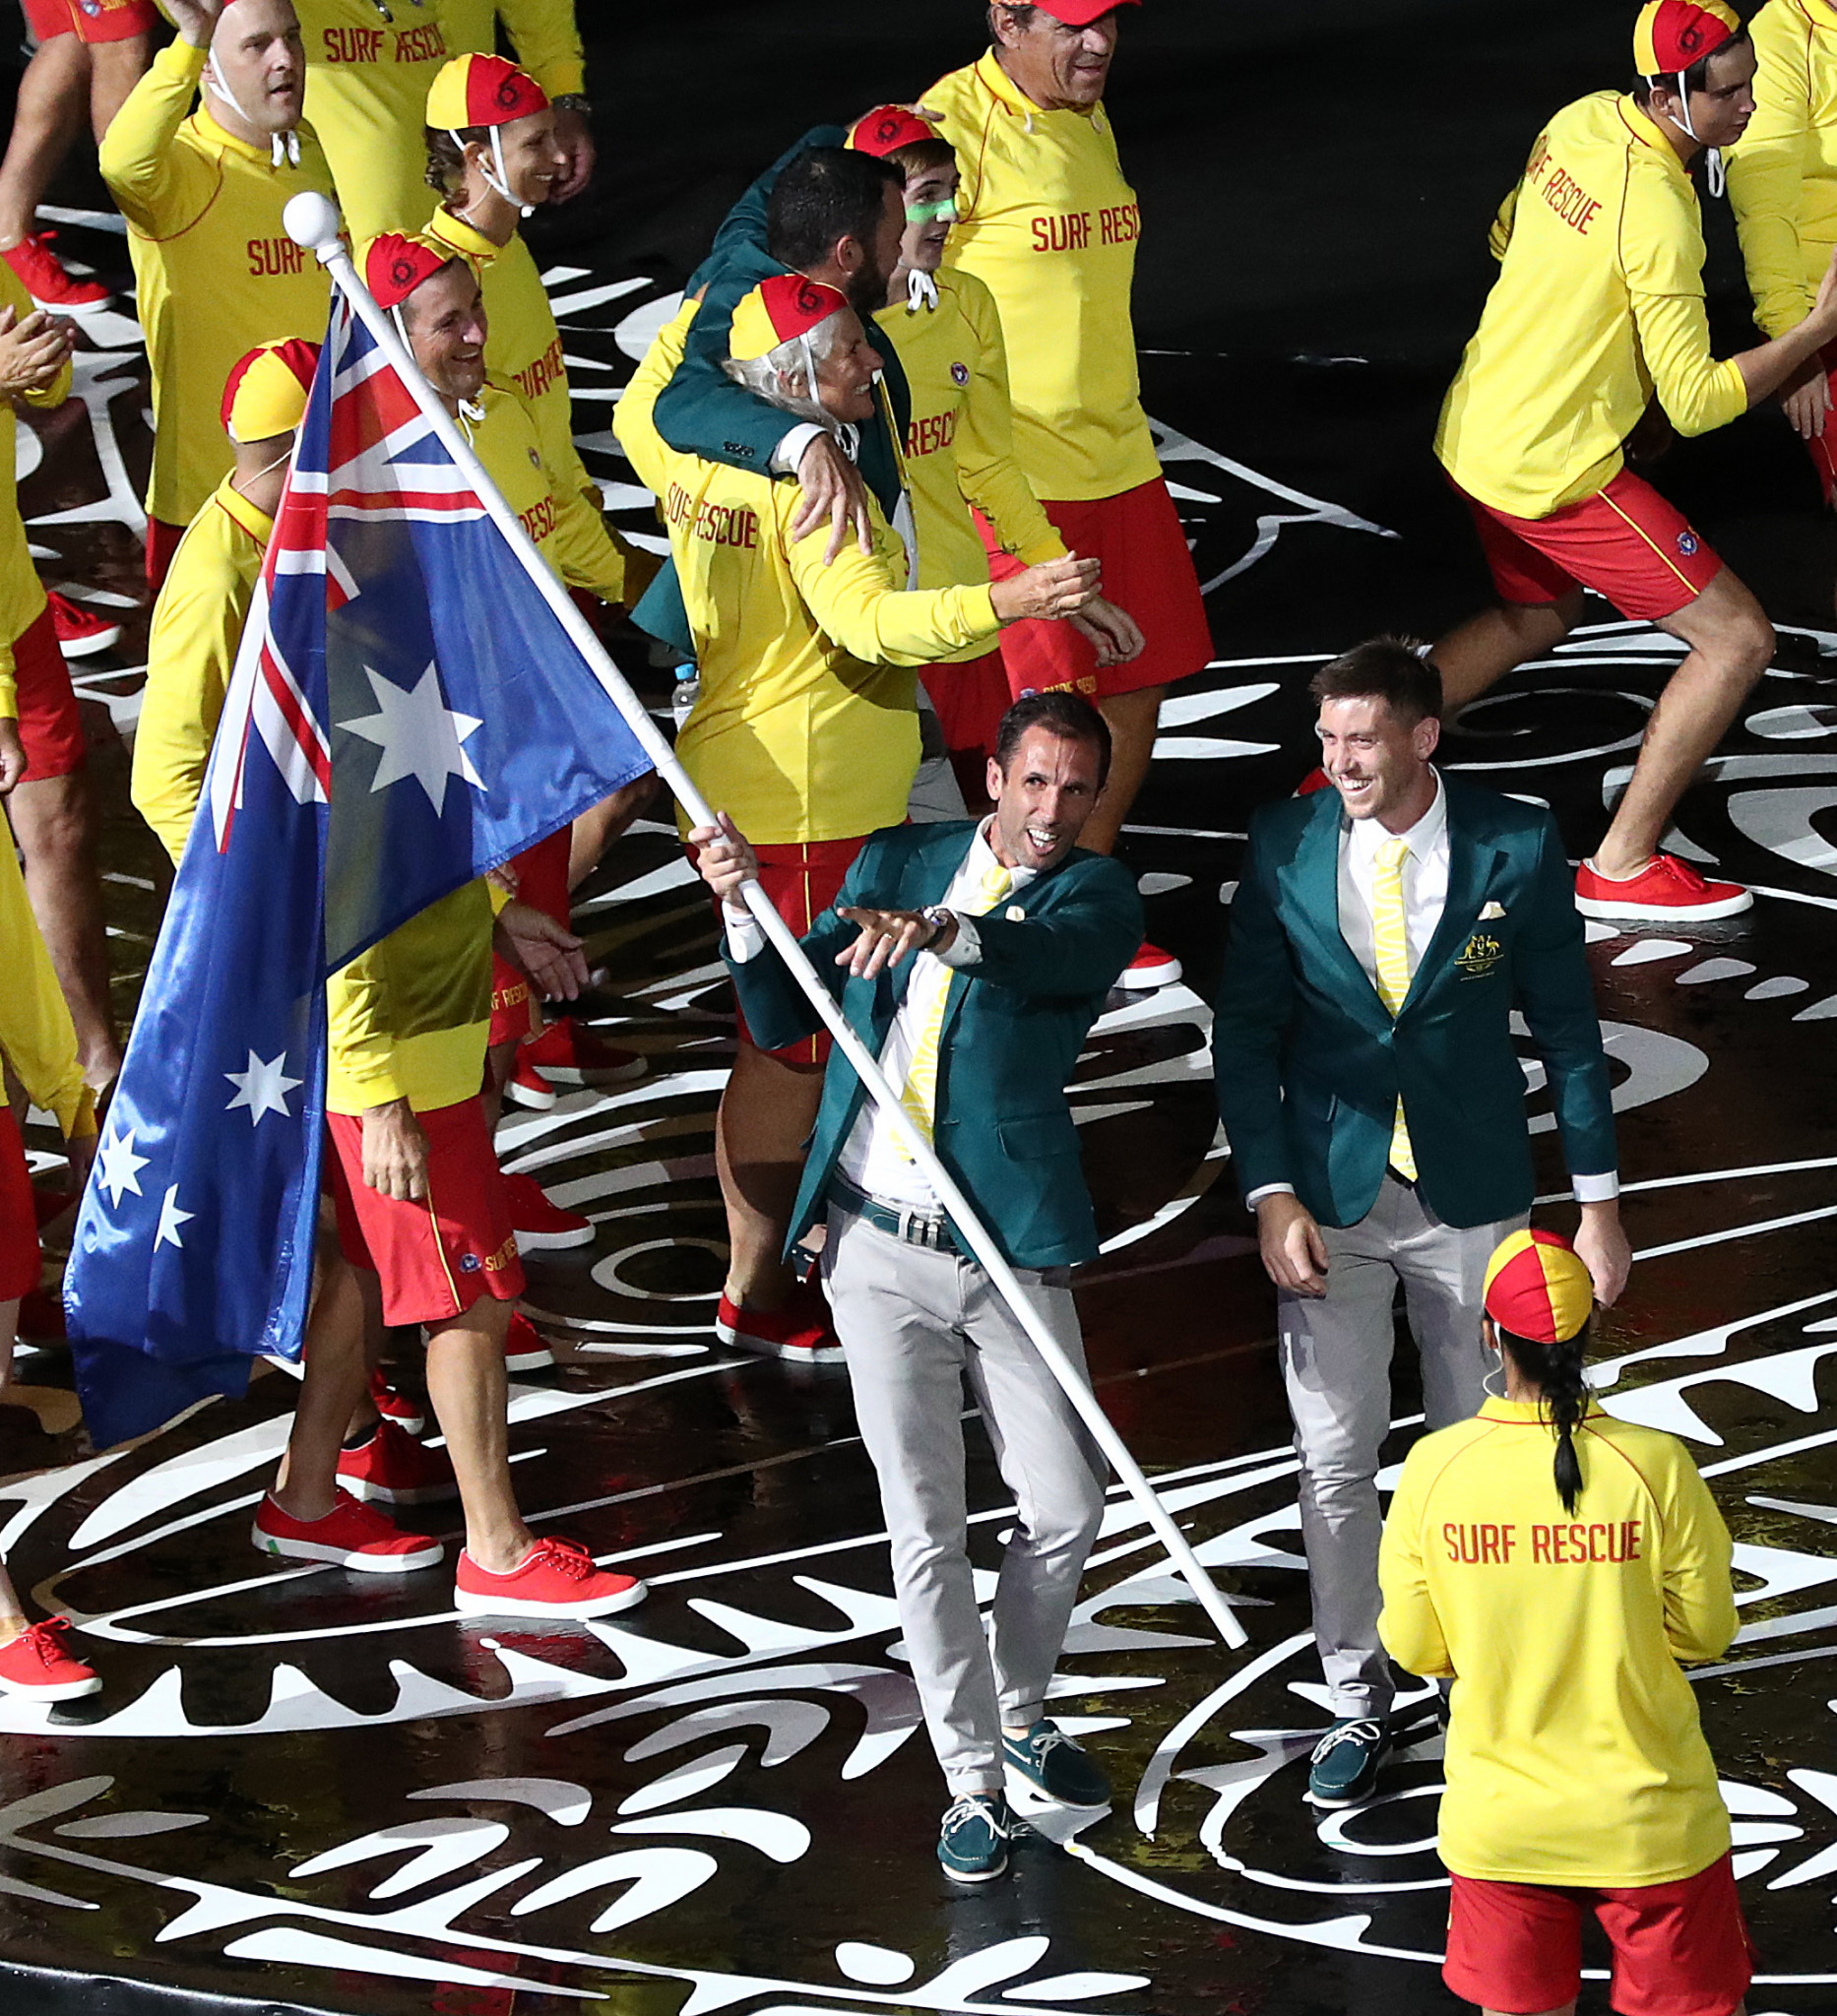 Another hockey player, Mark Knowles, carried Australia's flag during the Opening Ceremony of the 2018 Commonwealth Games in the Gold Coast ©Getty Images